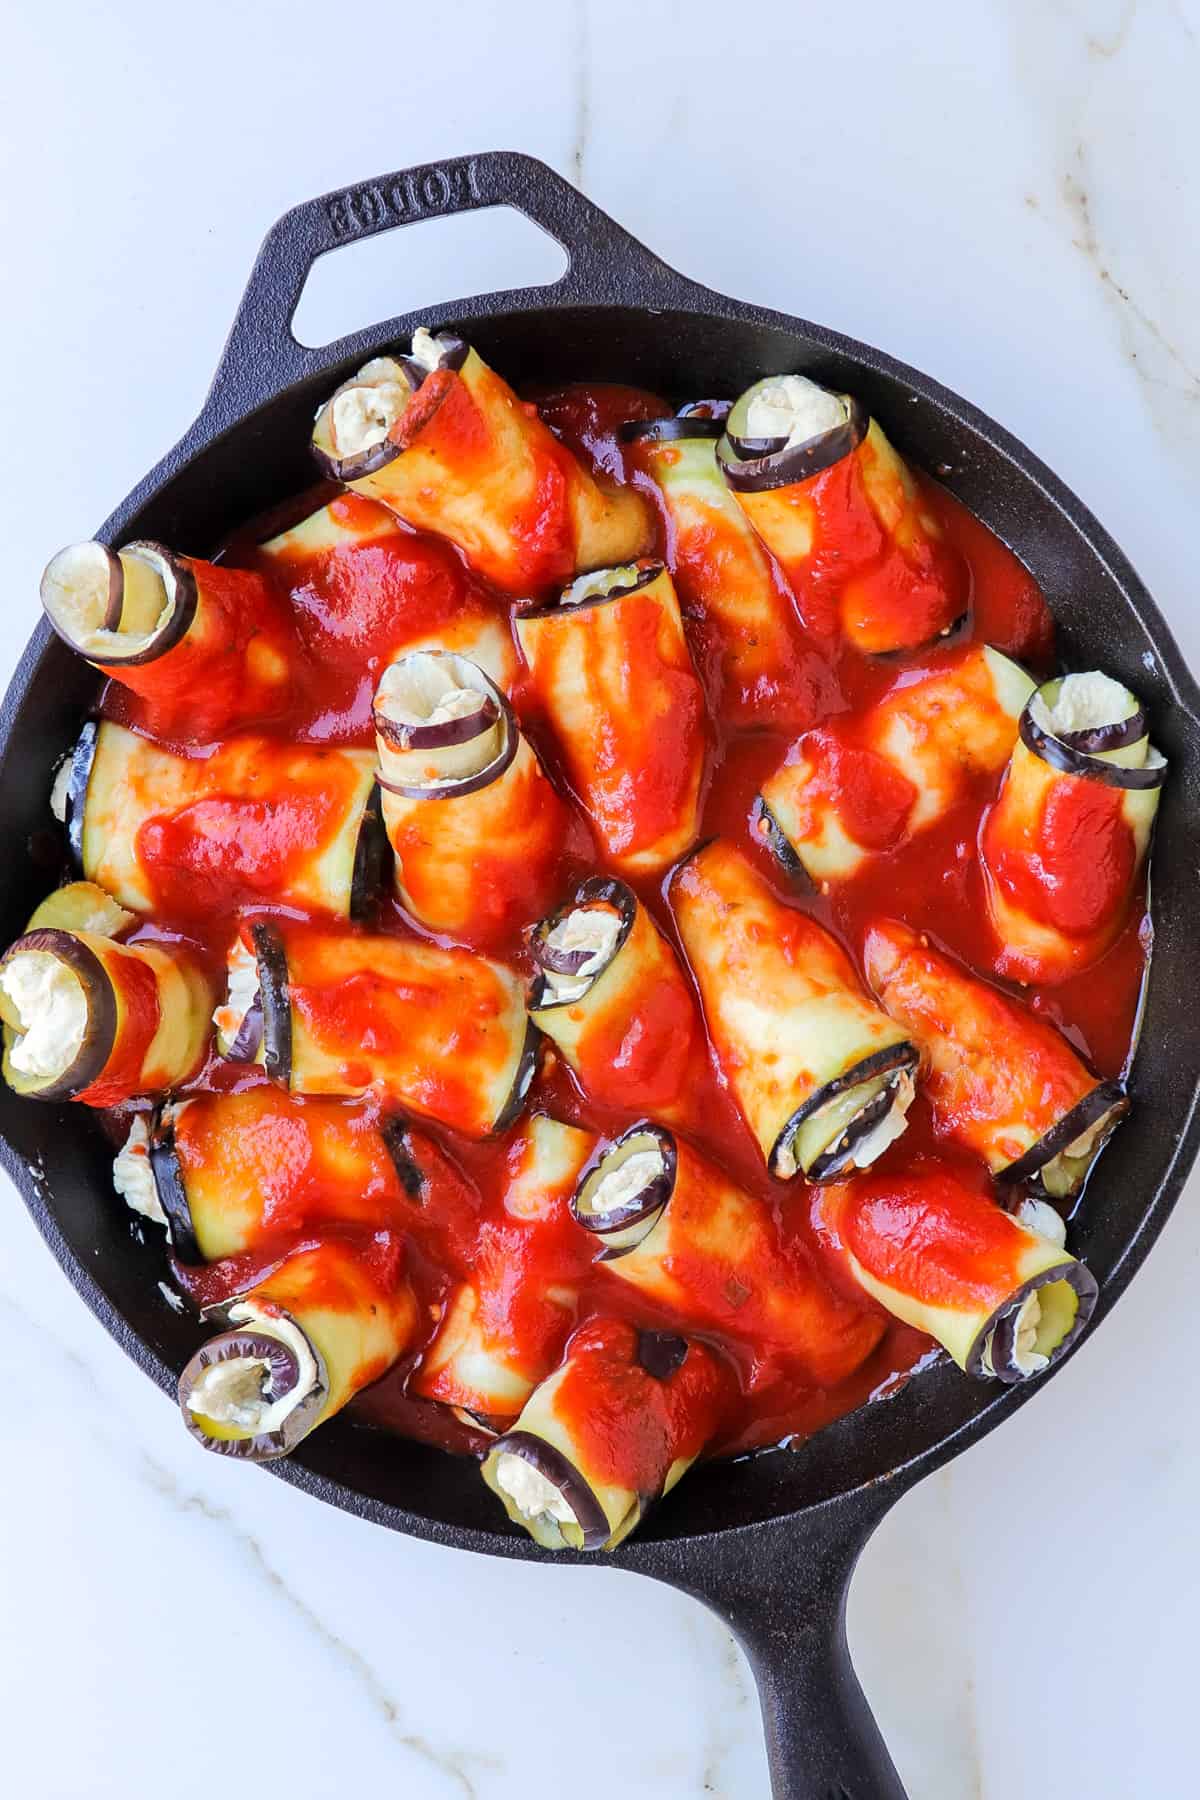 Eggplant rolls in a baking dish with marinara sauce poured on top.